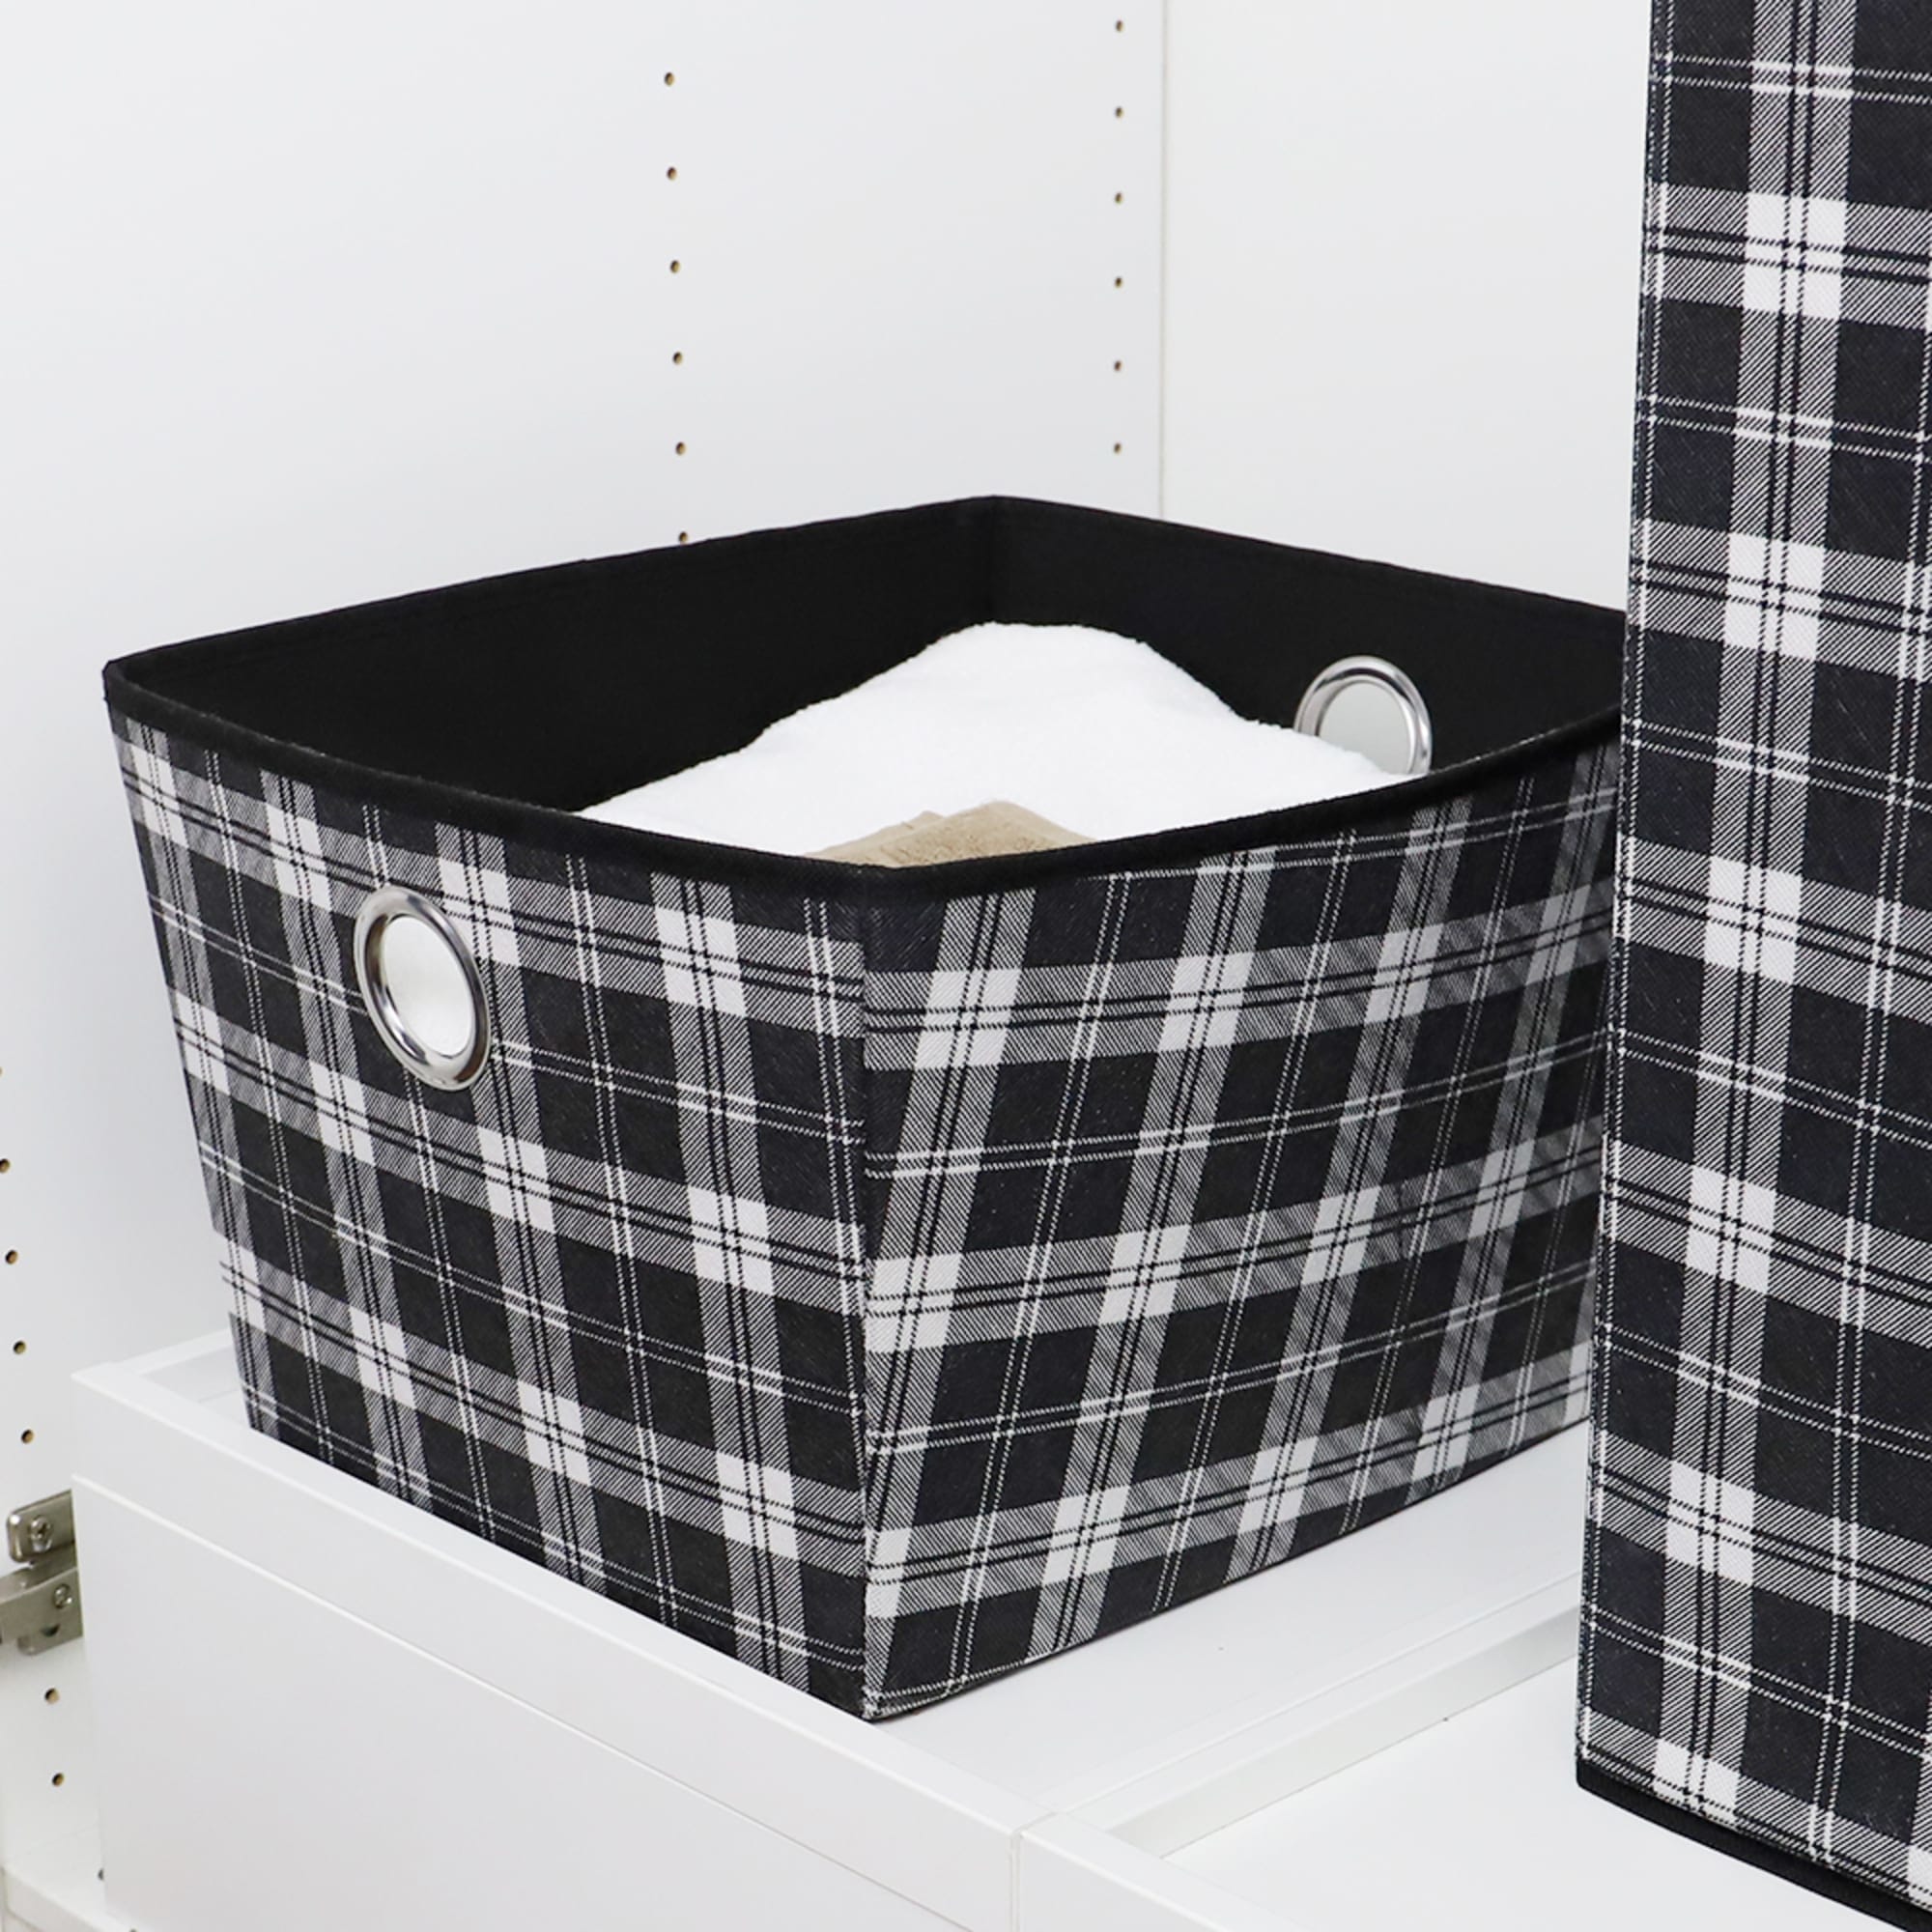 Home Basics Plaid Large Non-Woven Open Storage Bin with Grommet Handles, Black $6.00 EACH, CASE PACK OF 12